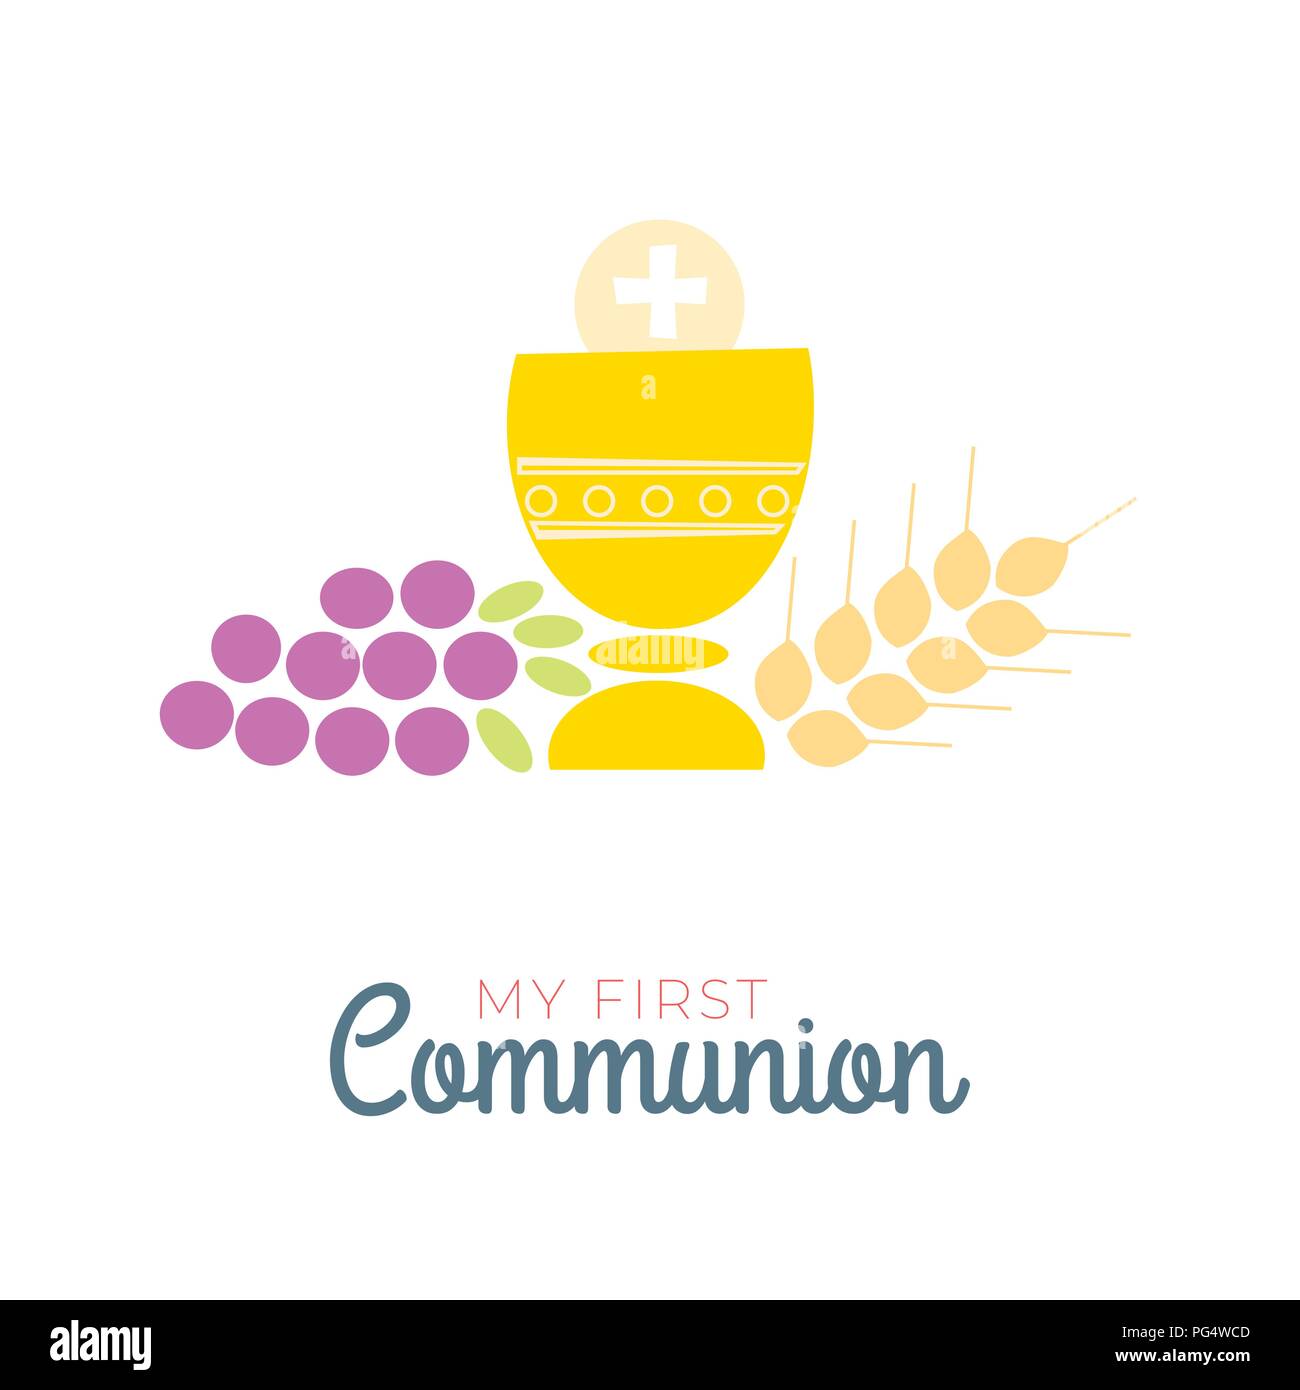 First communion symbols for a nice invitation design. Church and Christian Community Flat Outline Icons. Stock Vector